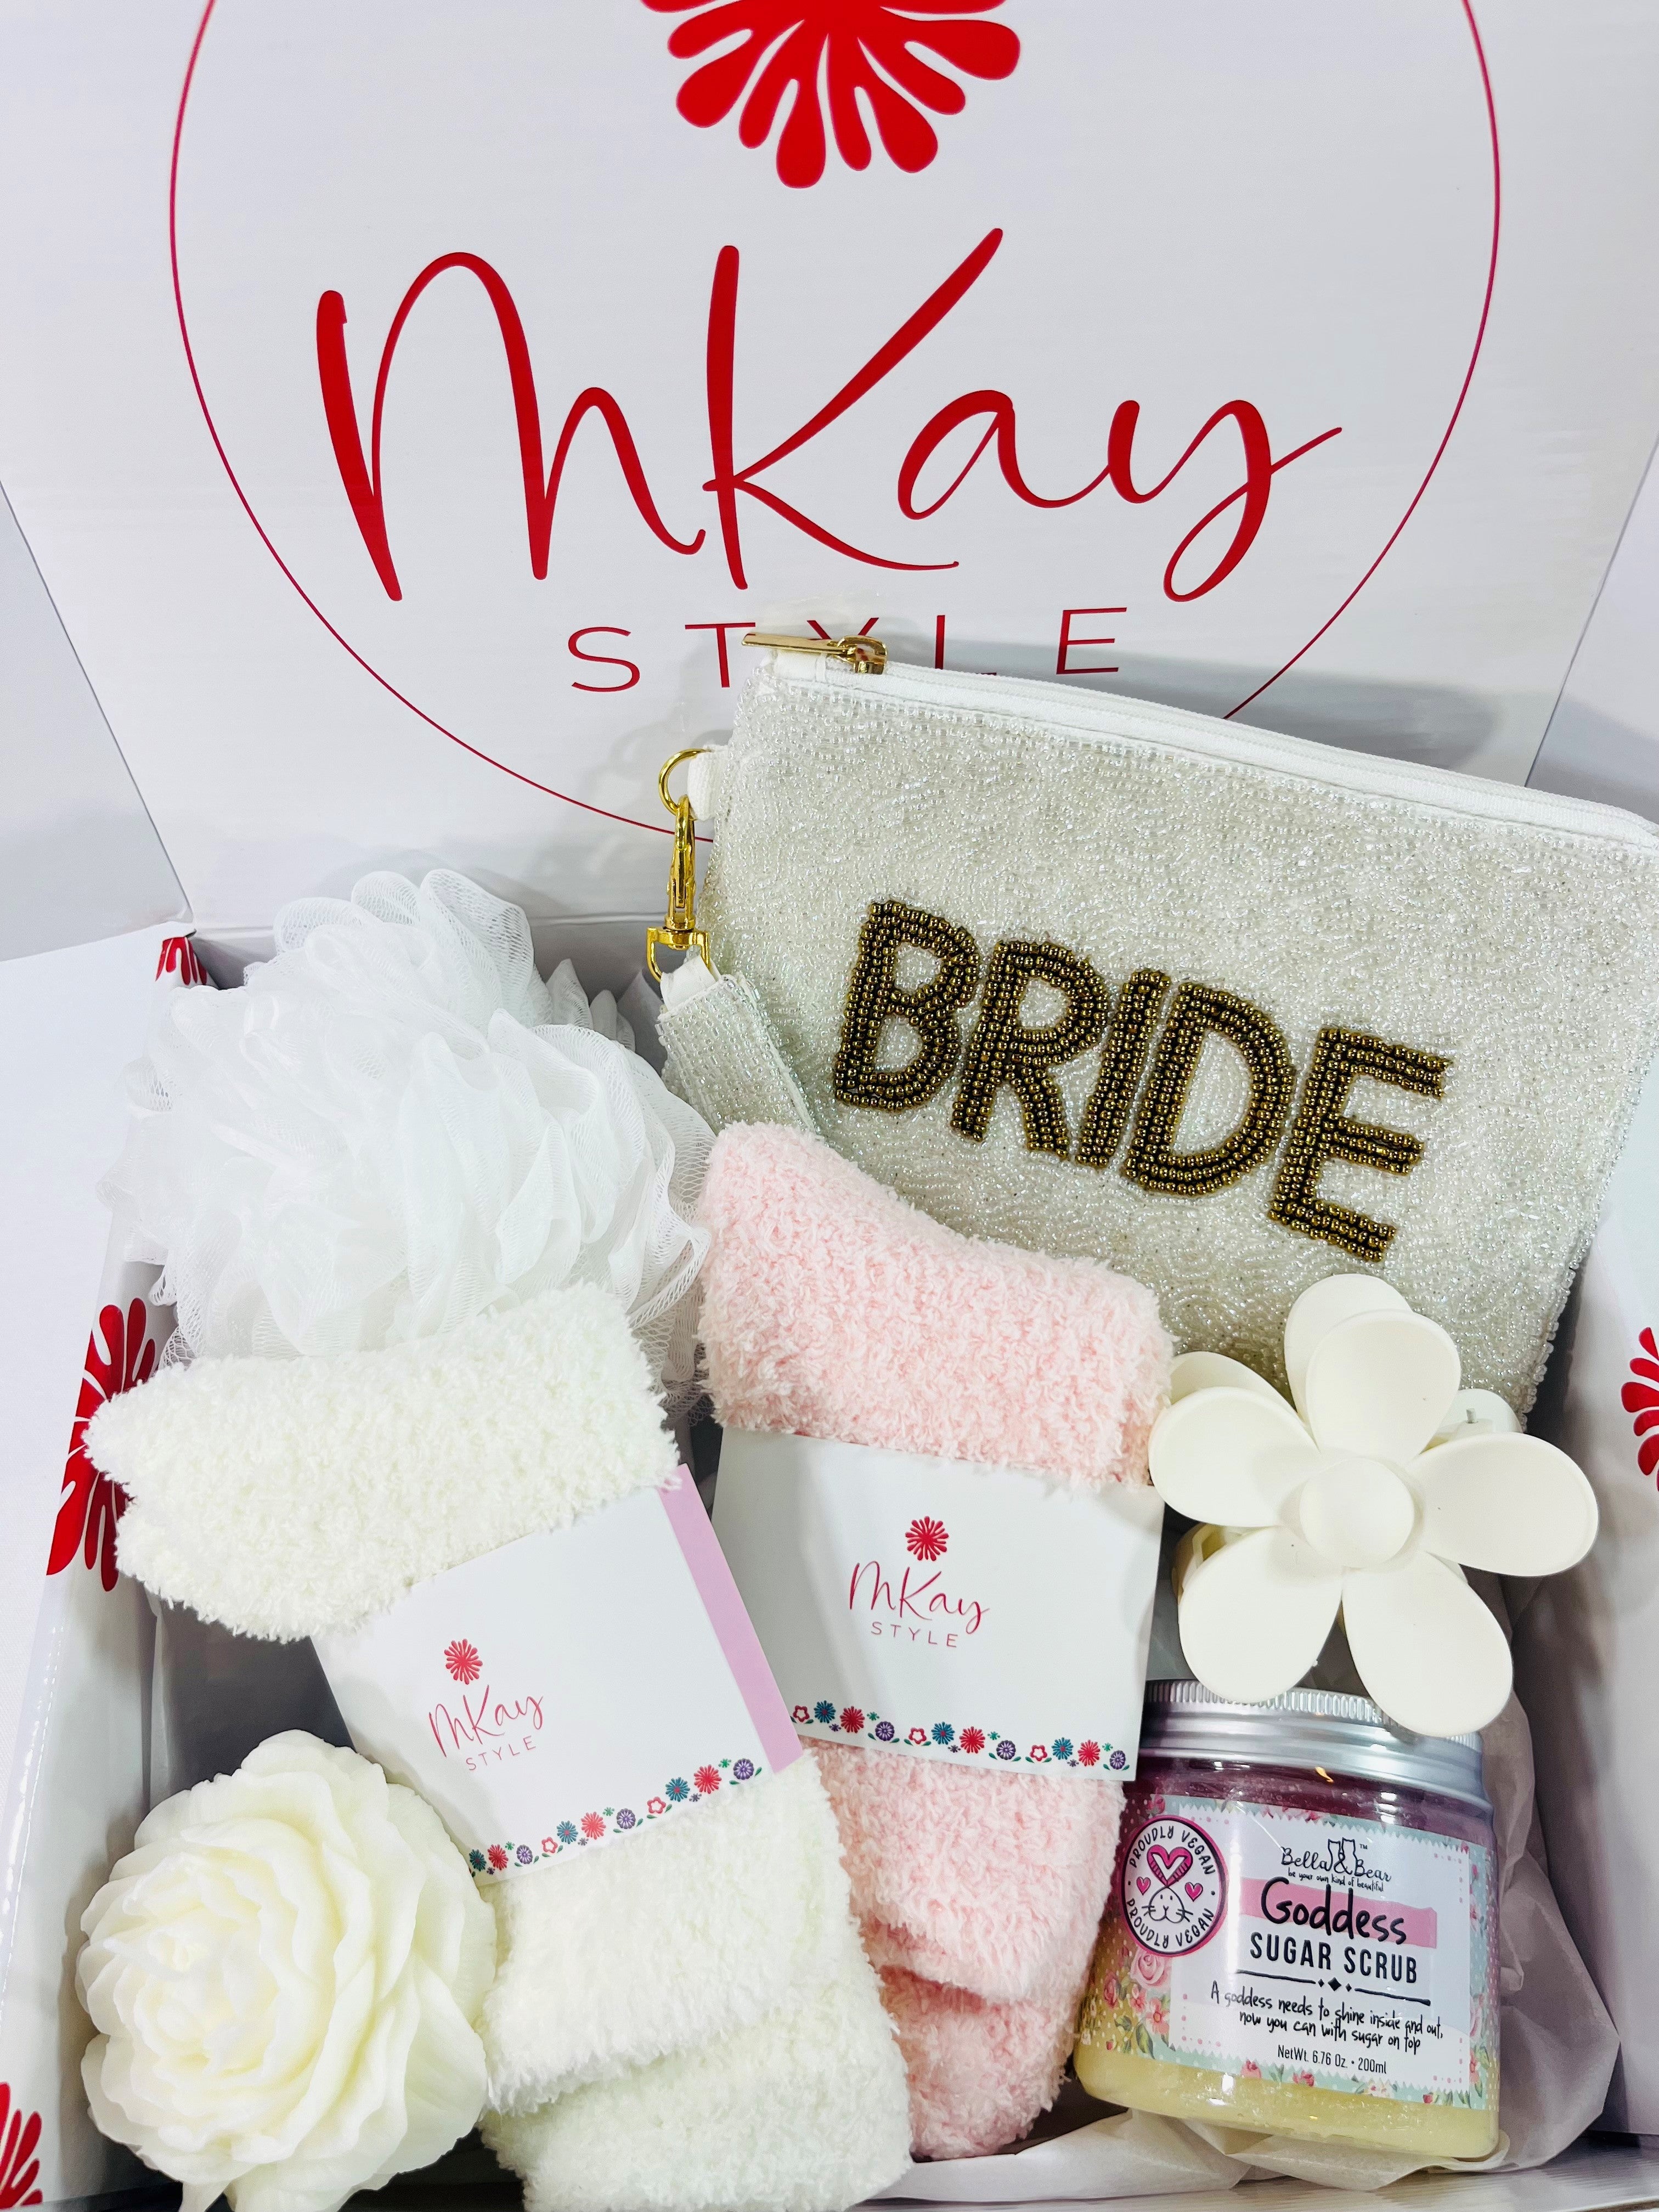 Engagement Gift For Bride To Be